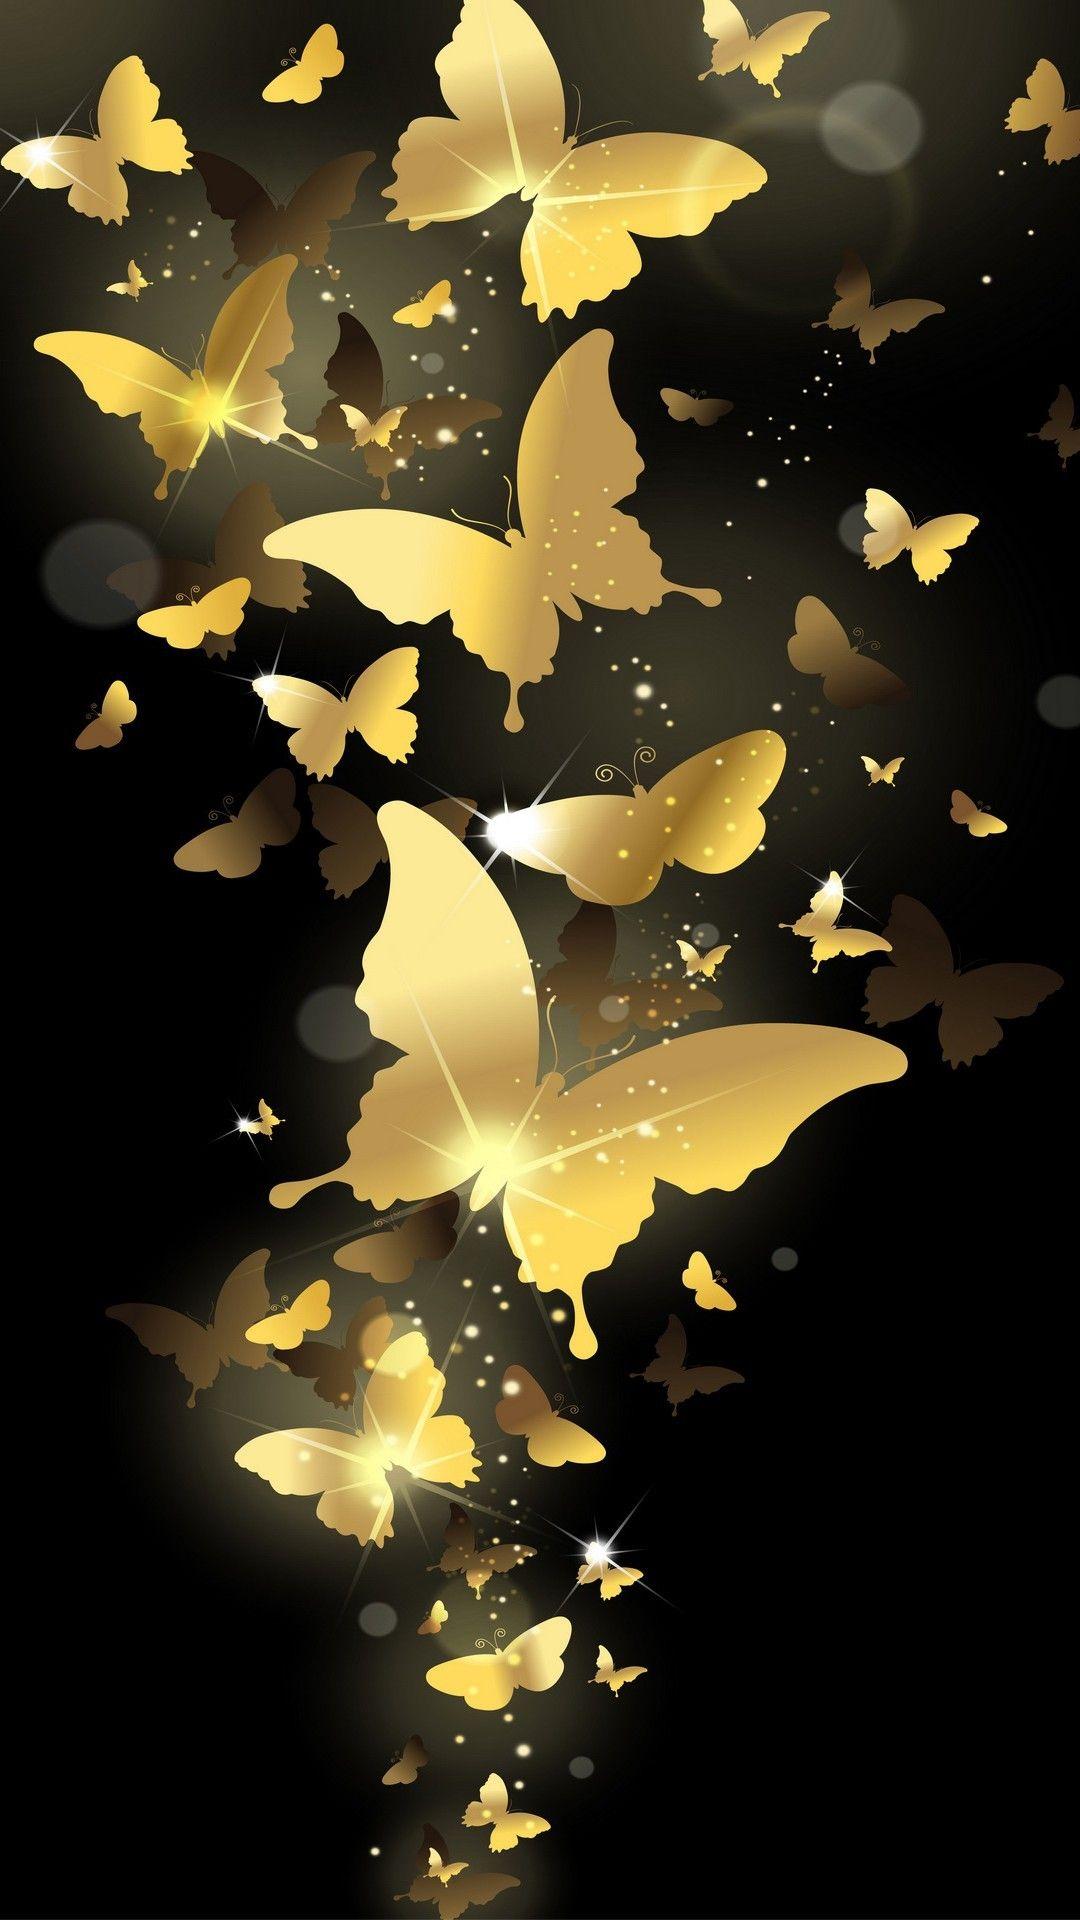 Black And Gold Butterfly Wallpapers Top Free Black And Gold Butterfly Backgrounds Wallpaperaccess